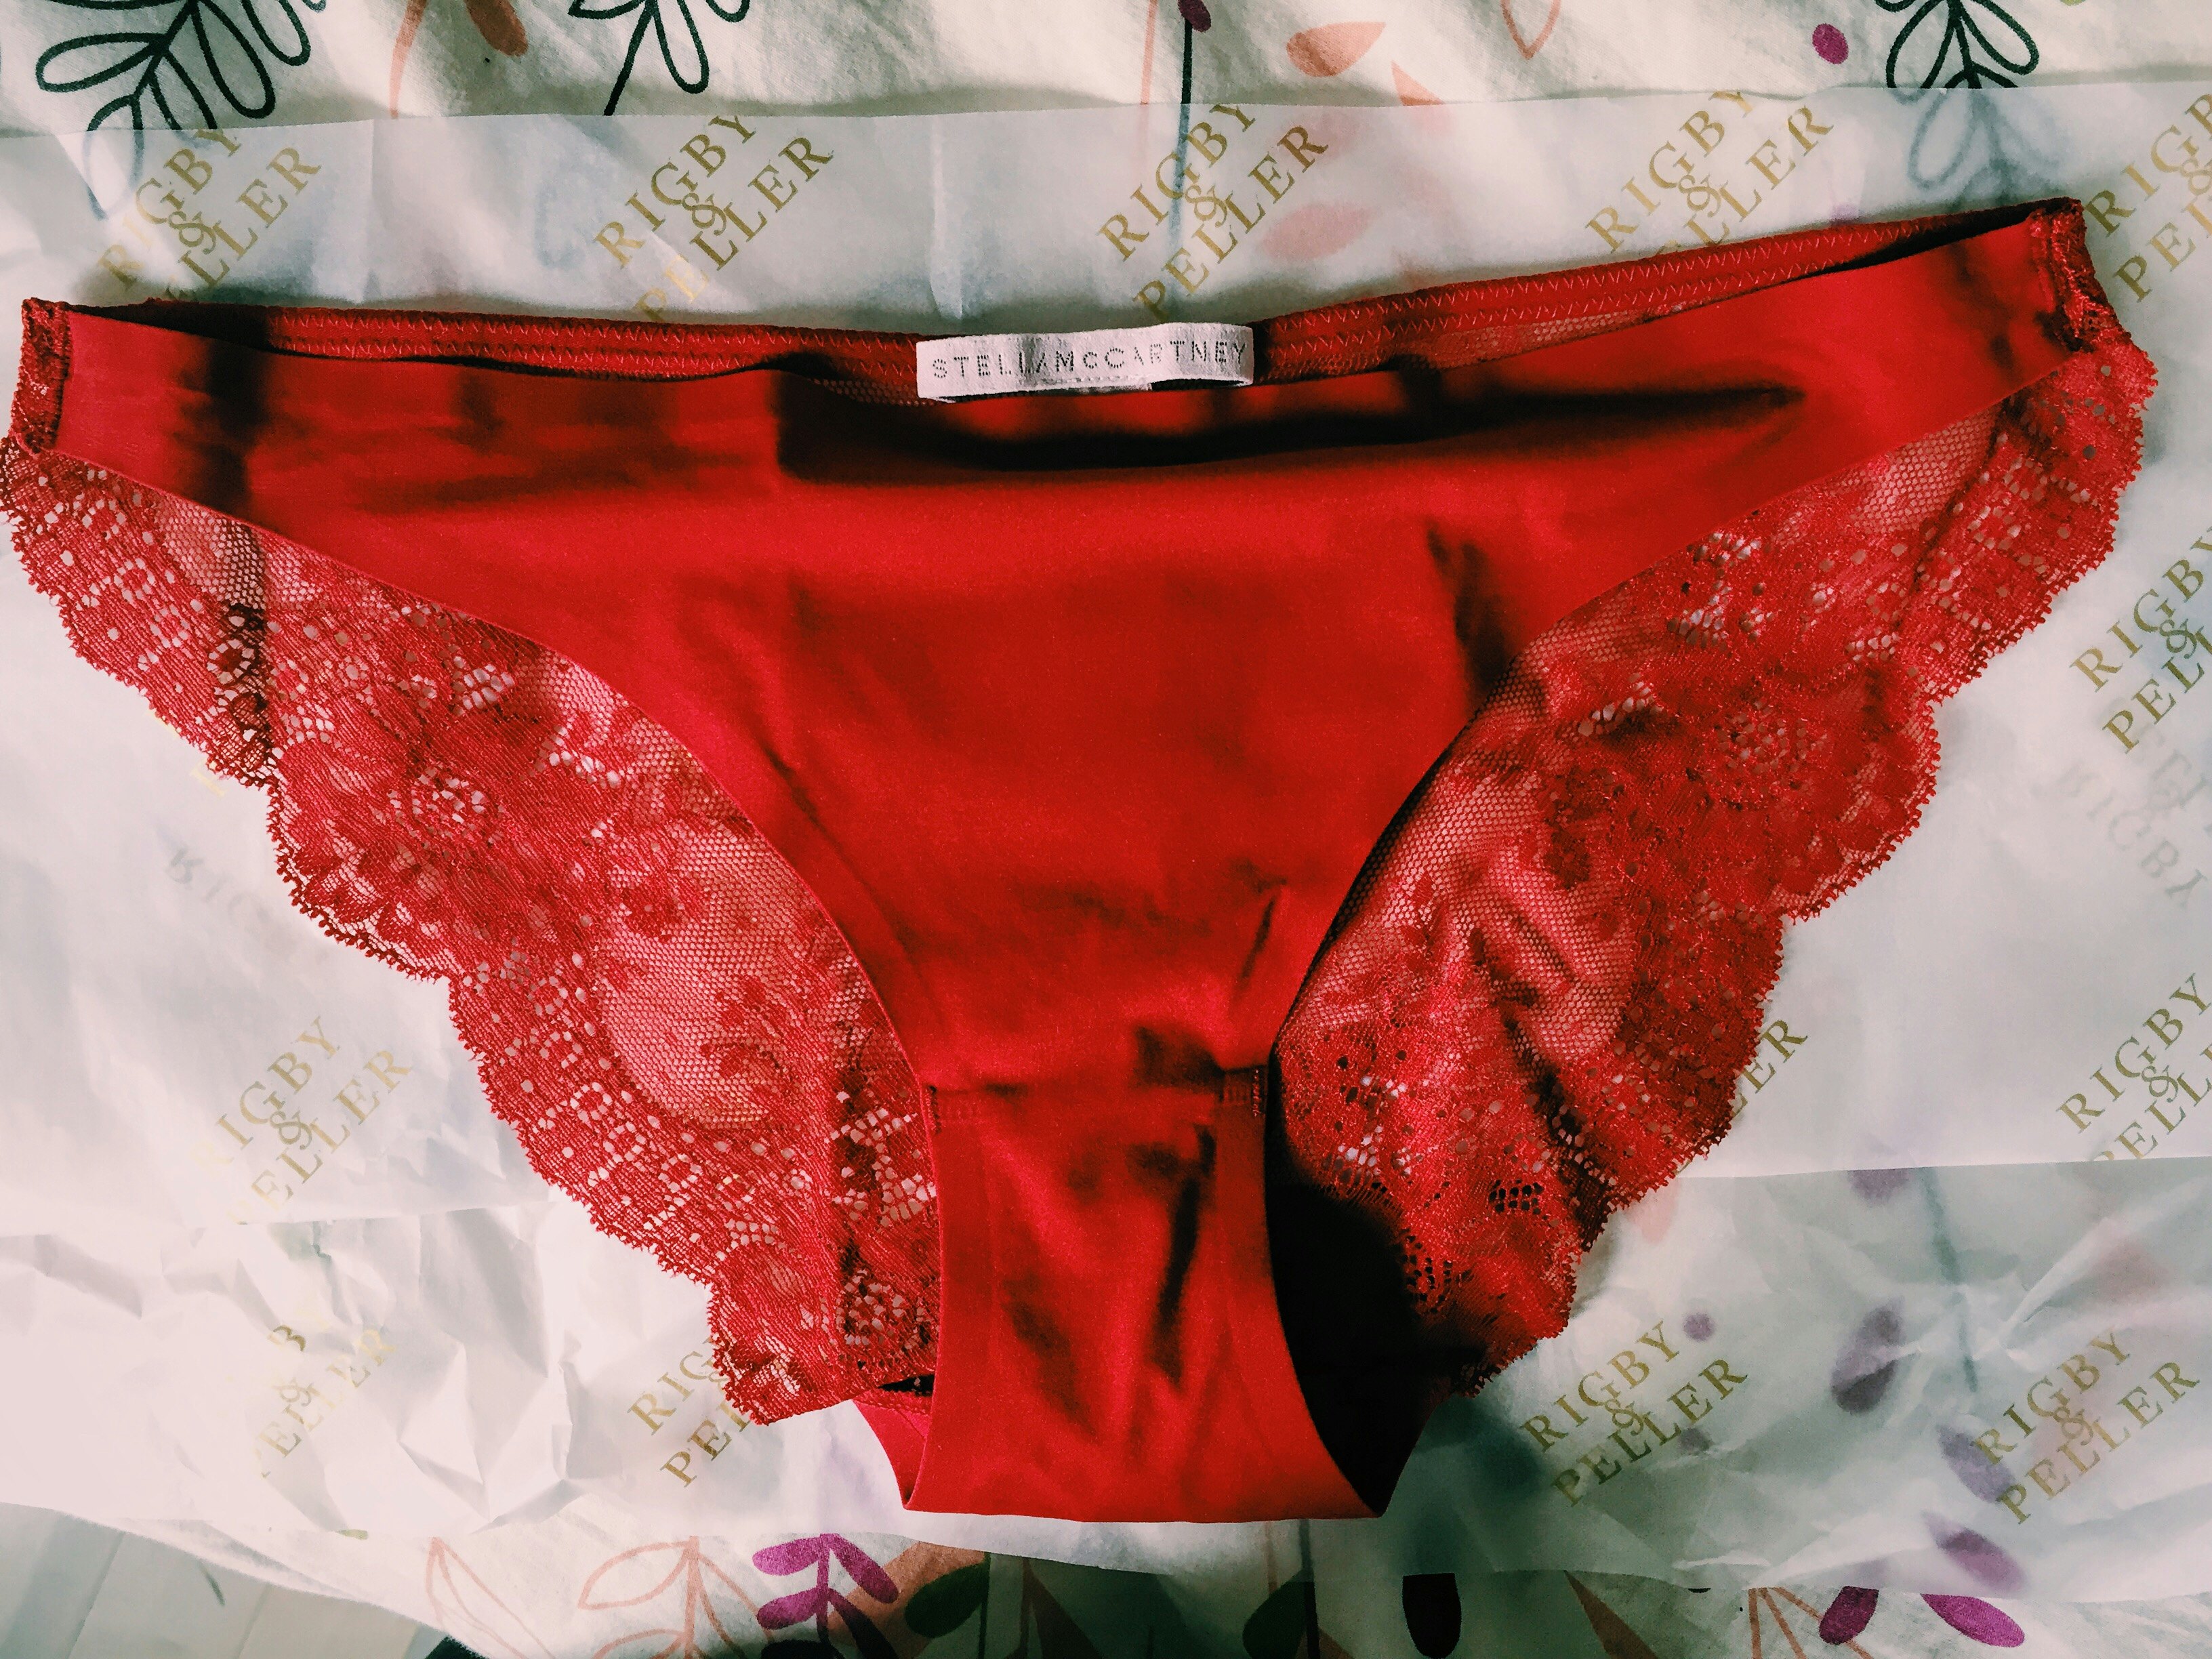 What is the appeal of expensive underwear? - Quora